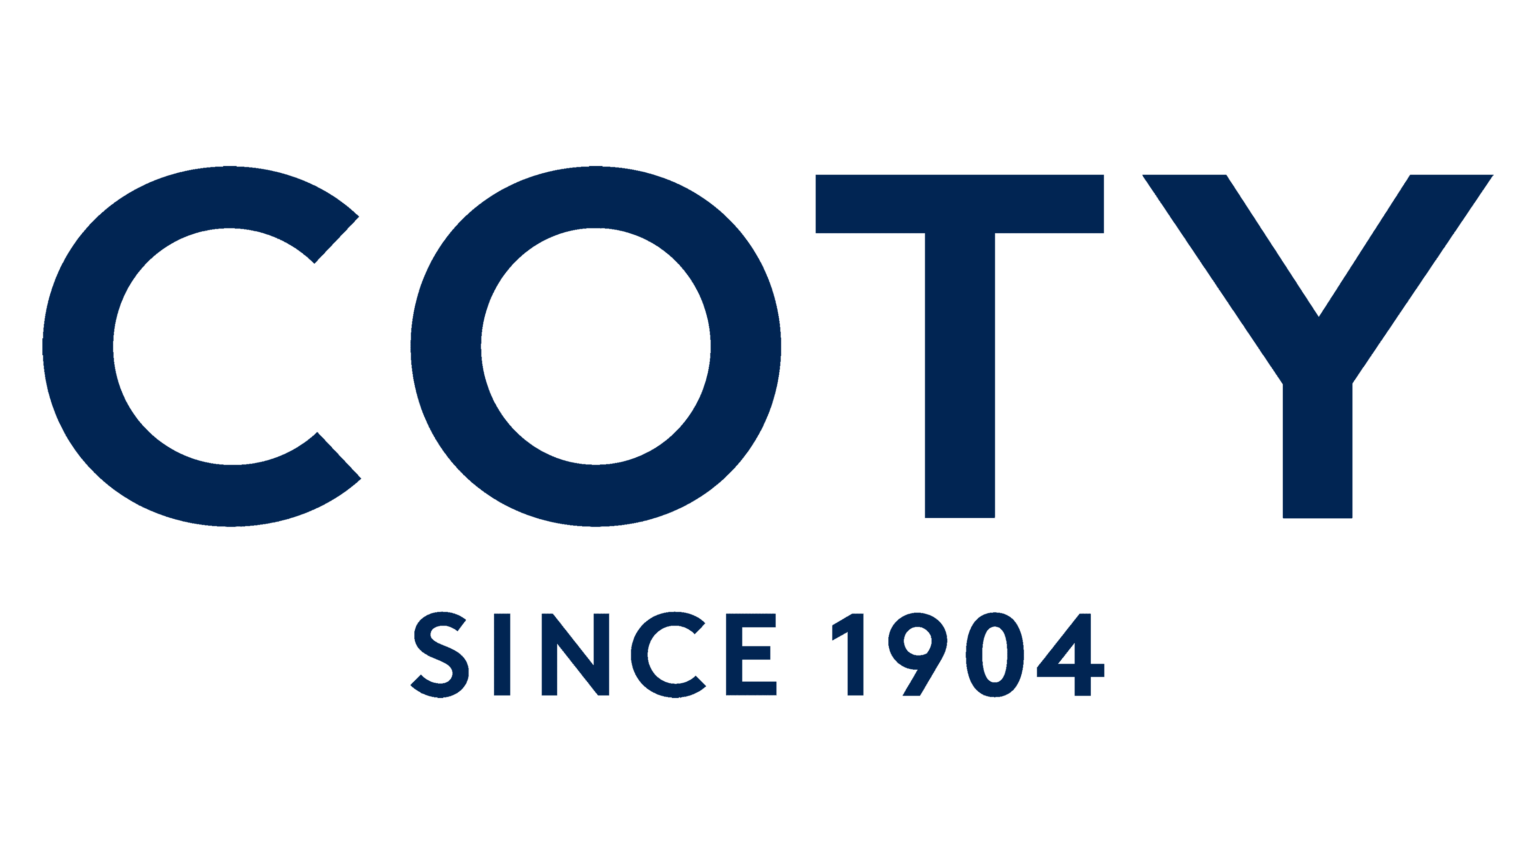 coty-logo-and-symbol-meaning-history-png